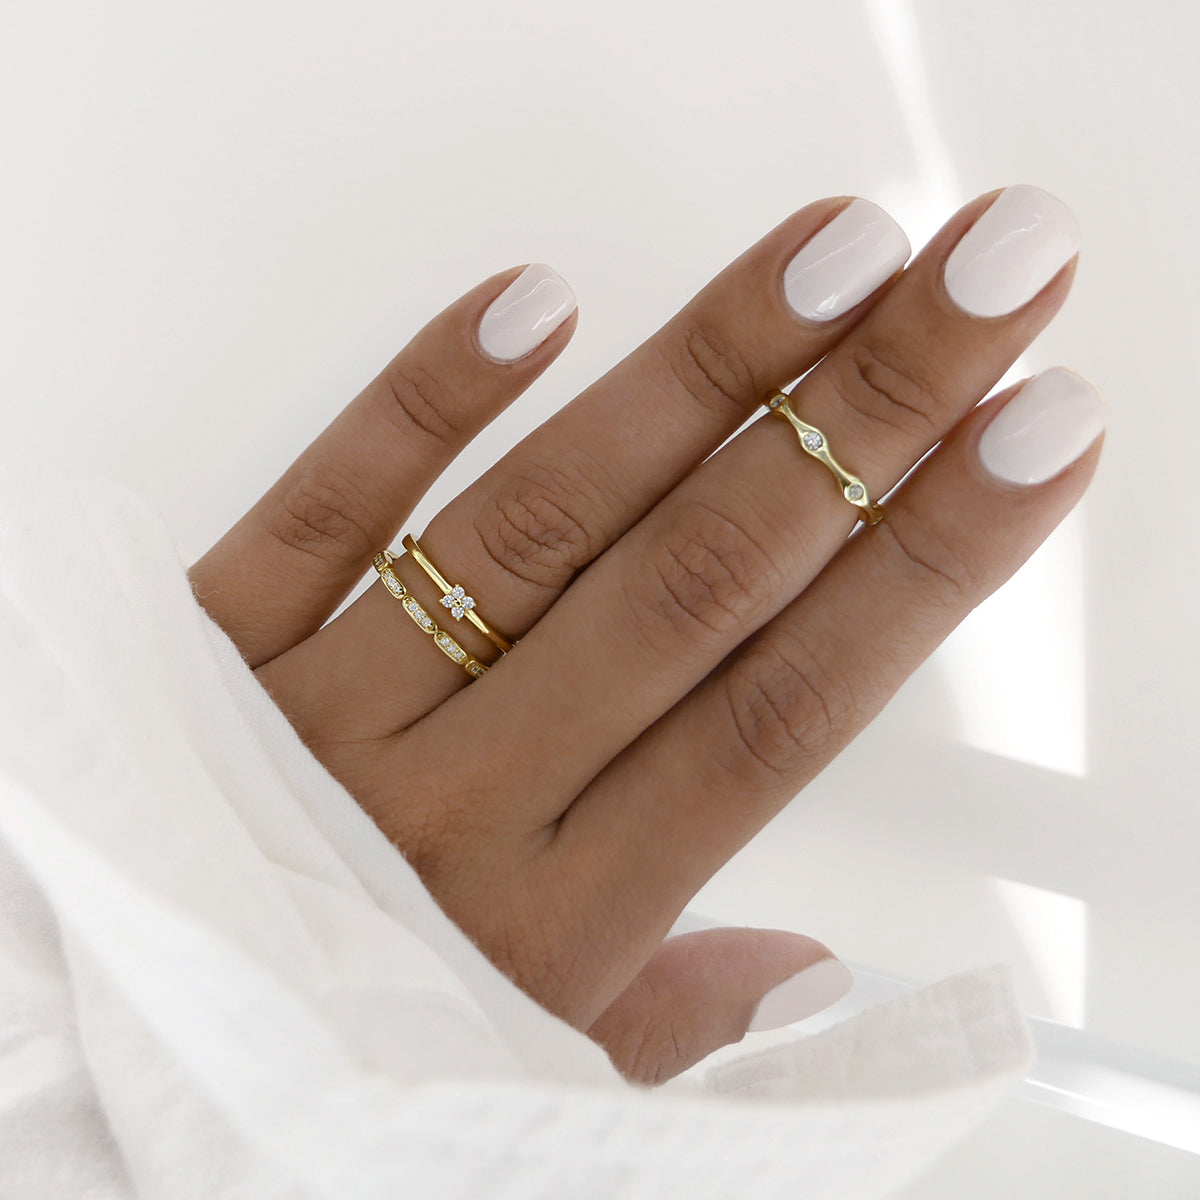 gold rings styled on hand